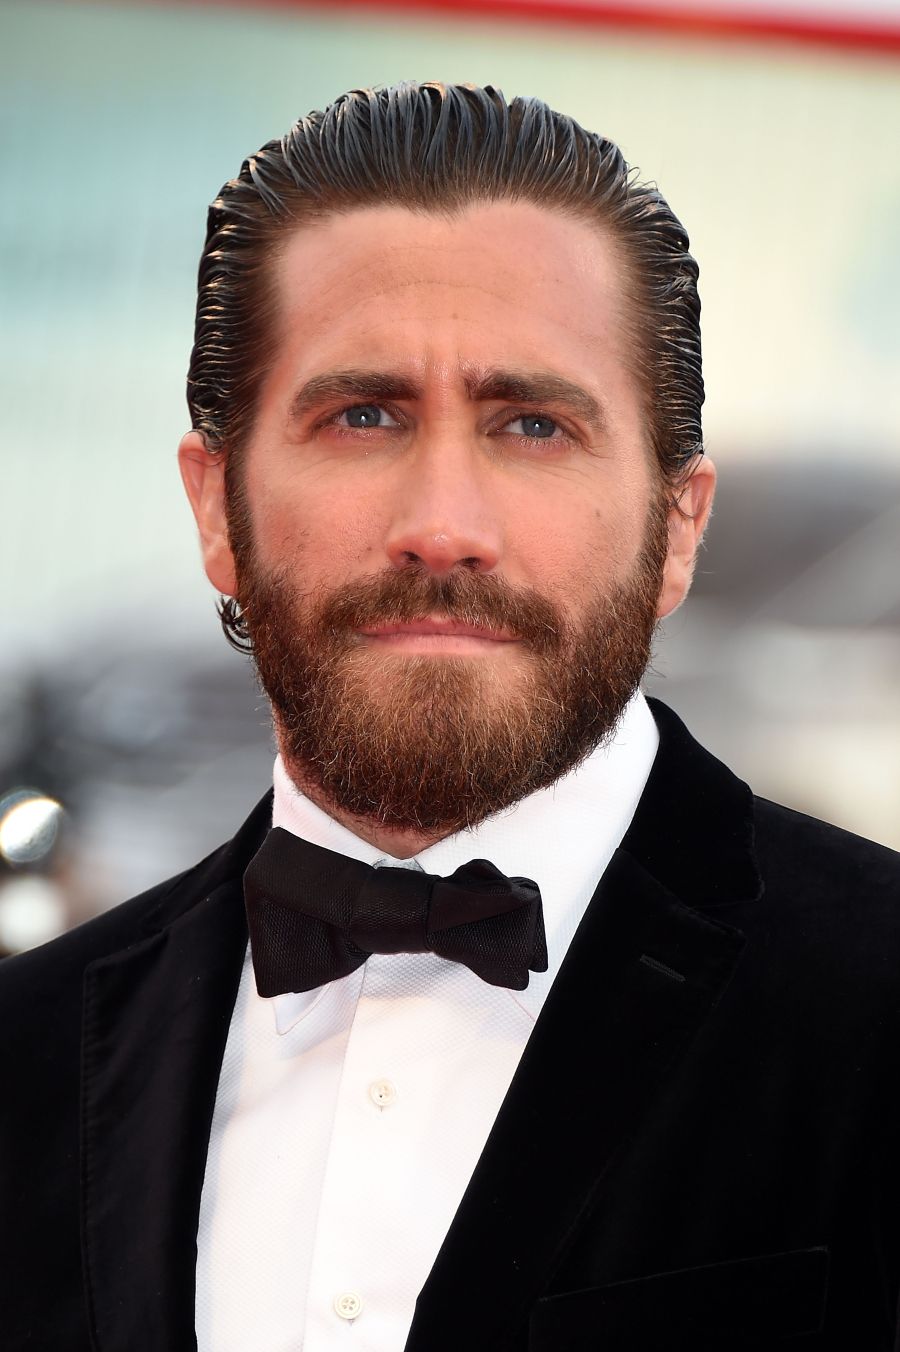 Opening Ceremony And 'Everest' Premiere - 72nd Venice Film Festival VENICE, ITALY - SEPTEMBER 02: Jake Gyllenhall attends the opening ceremony and premiere of 'Everest' during the 72nd Venice Film Festival on September 2, 2015 in Venice, Italy. (Photo by Venturelli/WireImage) mens hairstyles